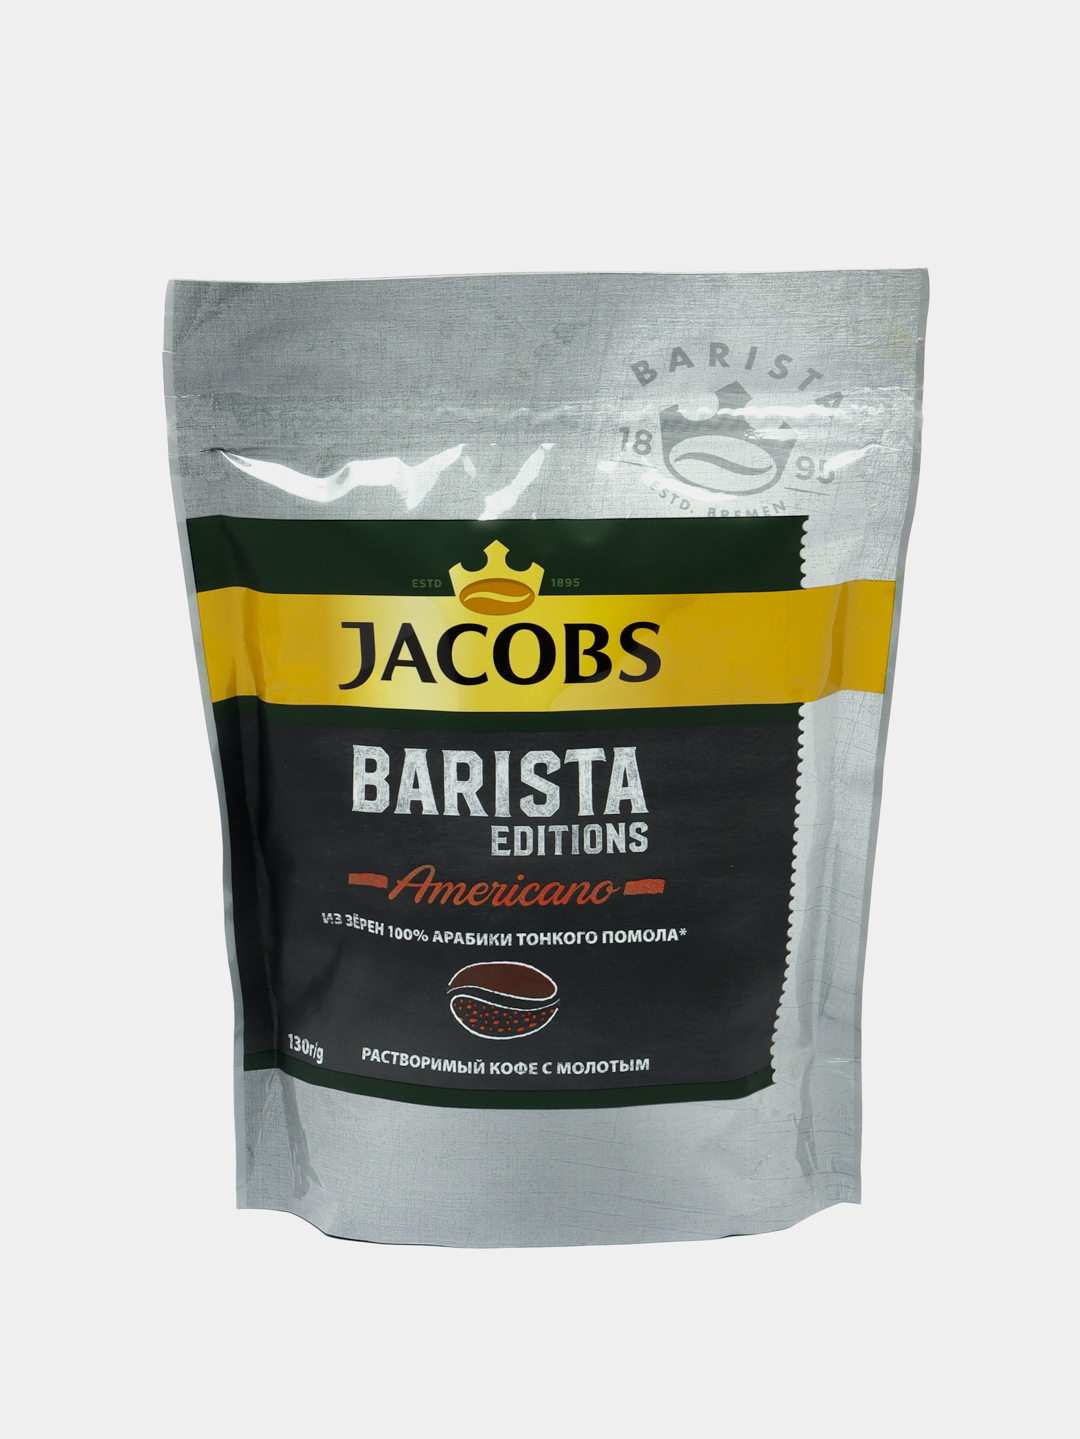 Jacobs Monarch Barista 12x70 gr Packet